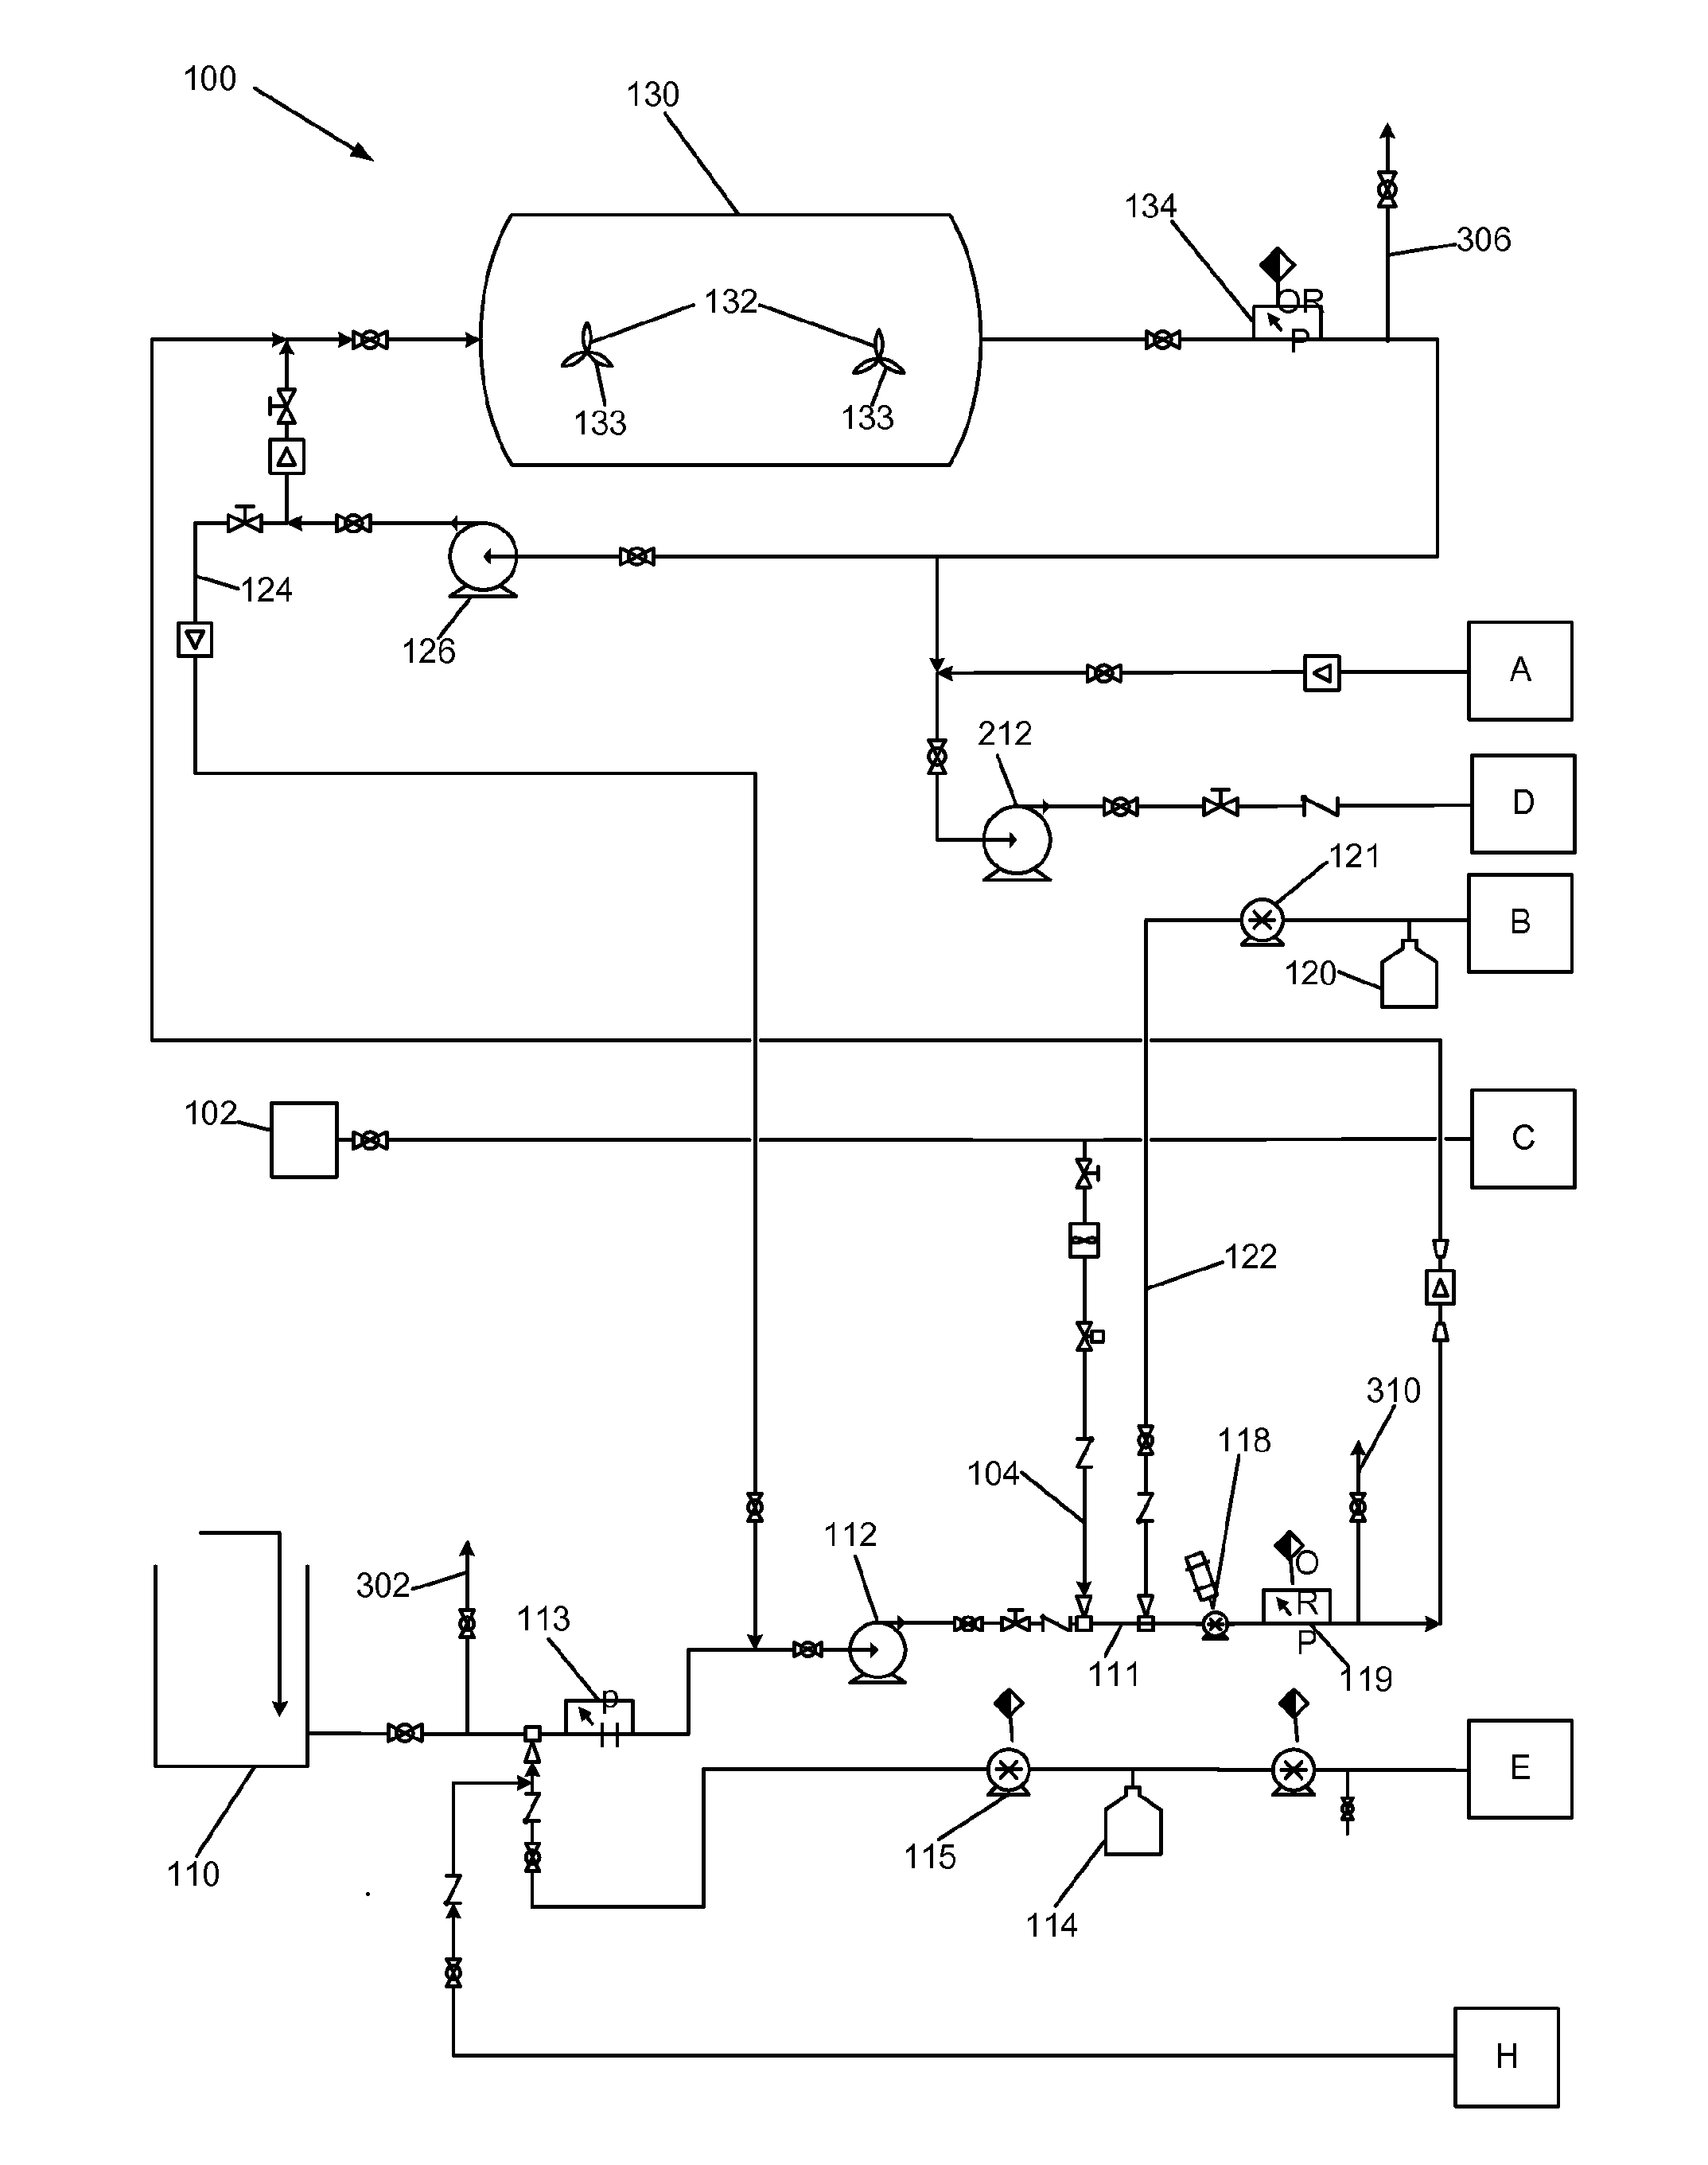 Apparatus and method for oxidative treatment of organic contaminants in waste water